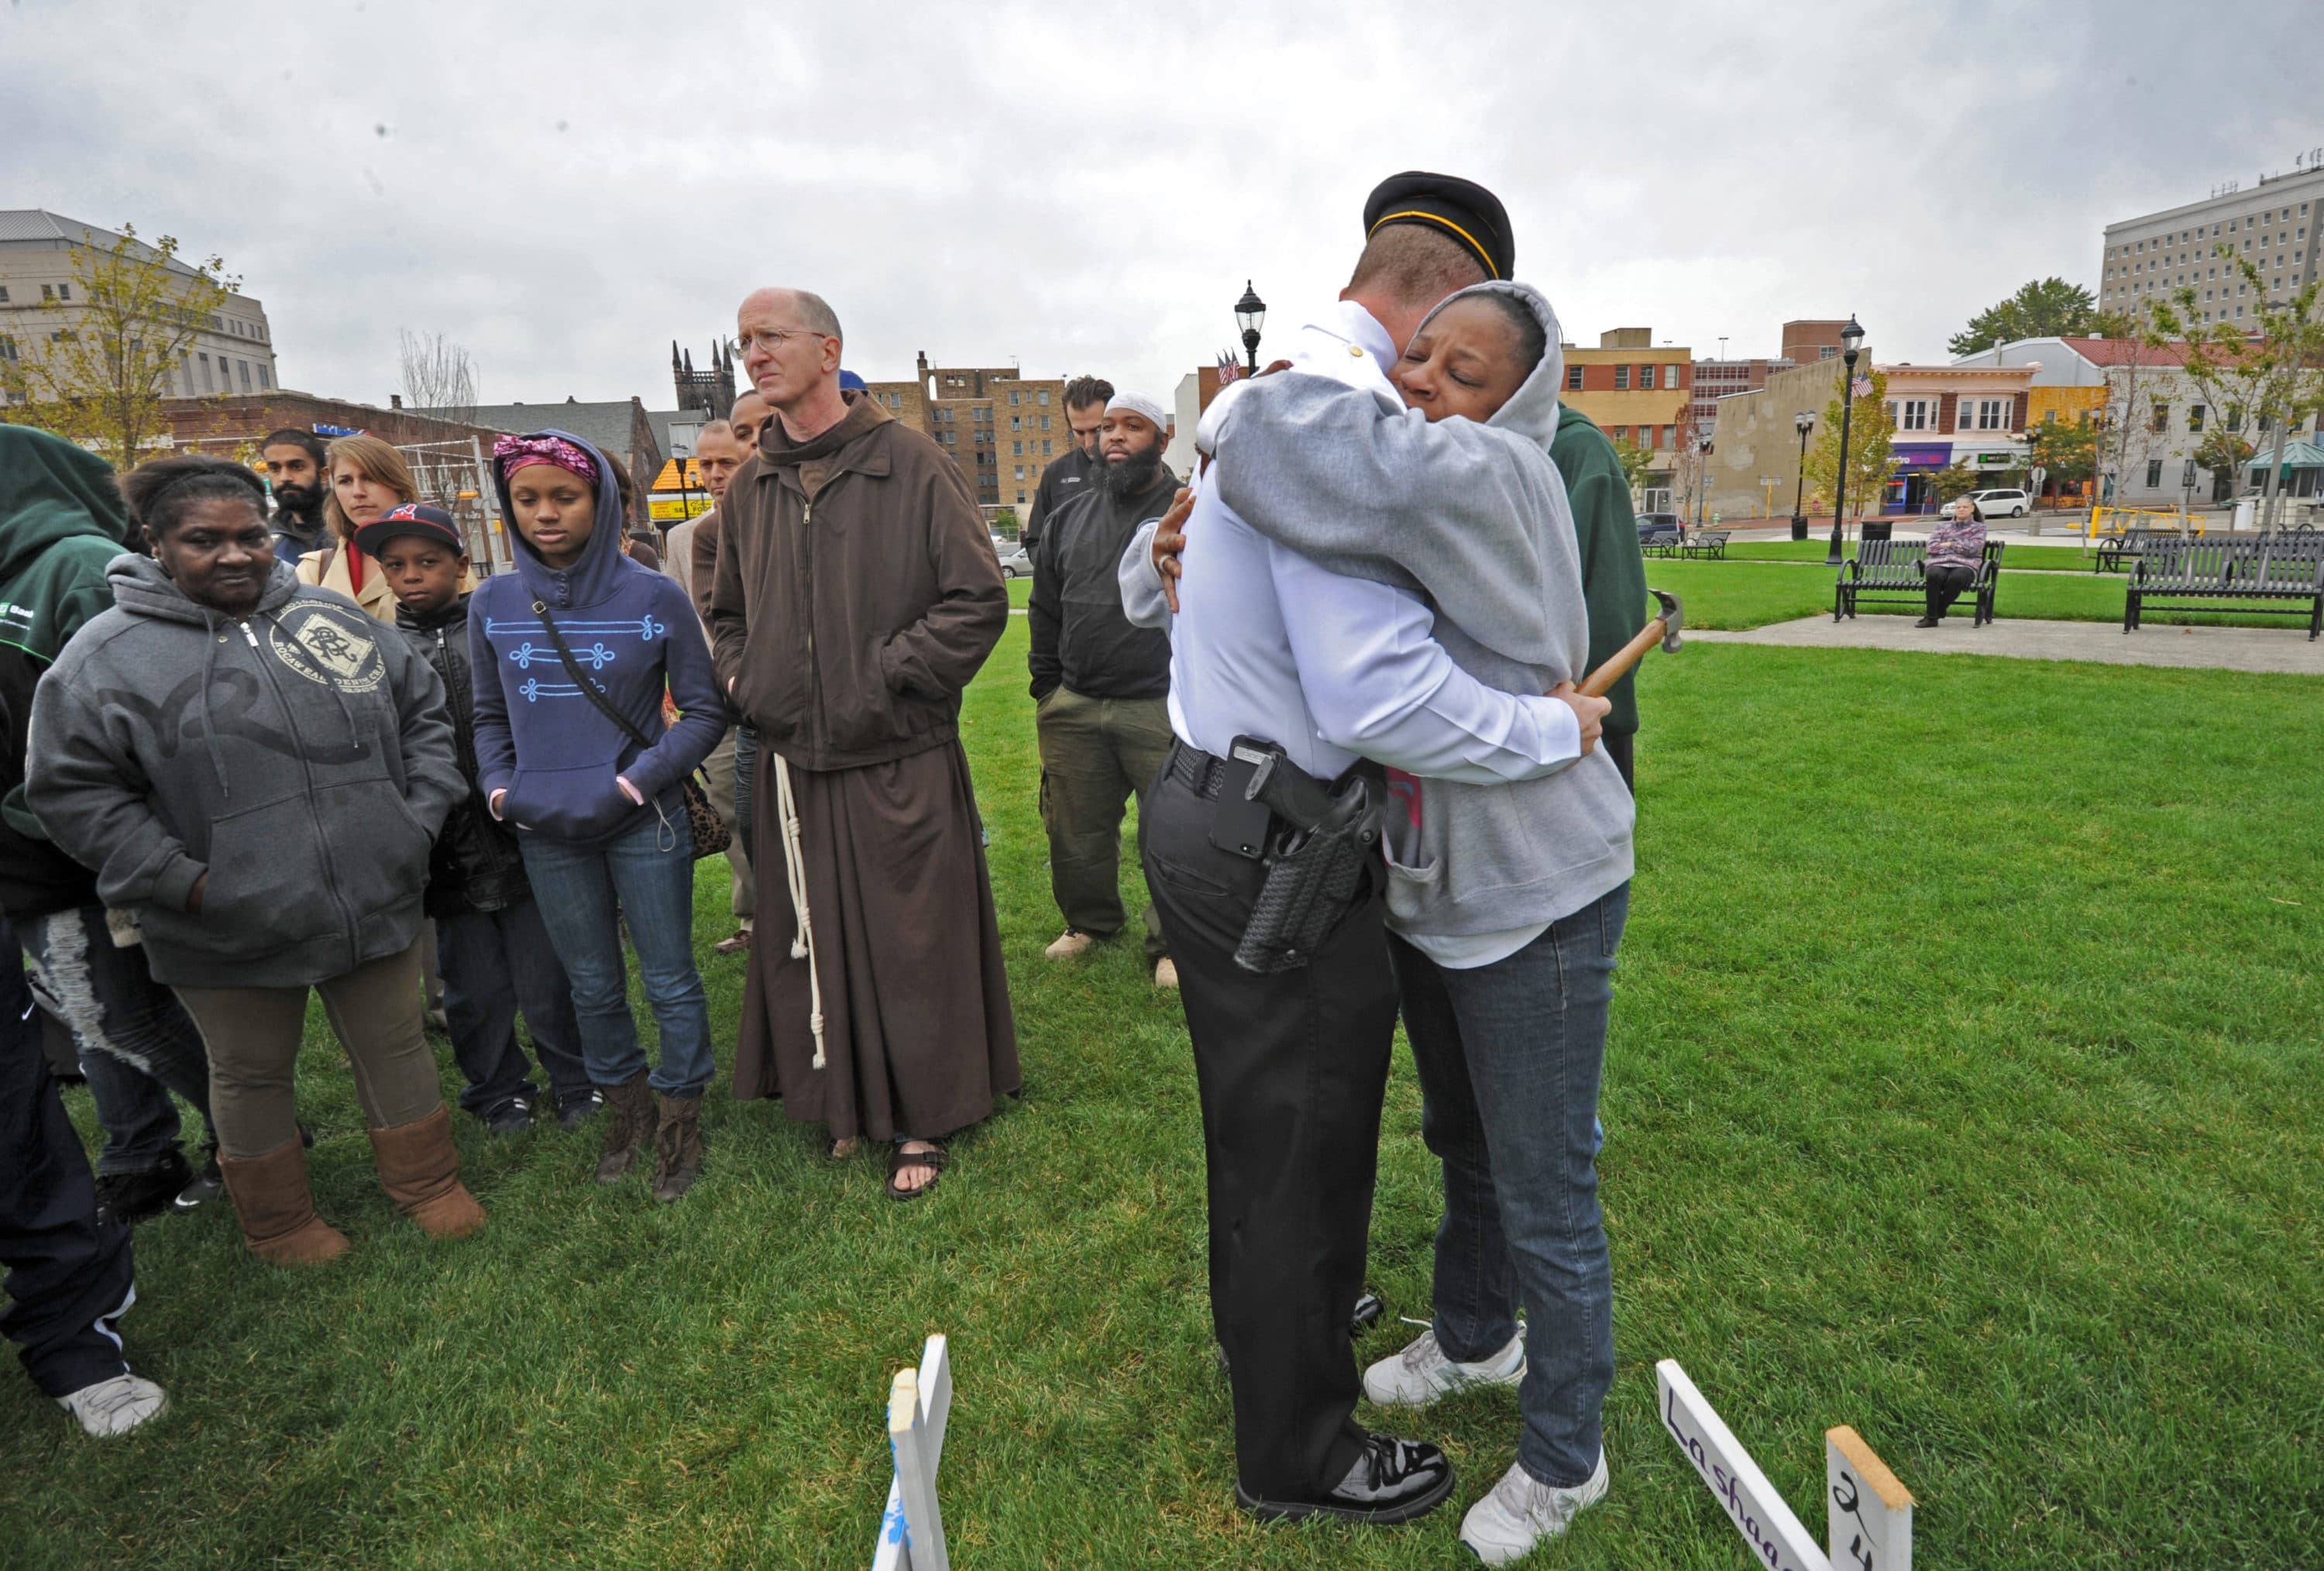 In the field of crosses, mourner Holly Walker gets a hug from Camden Police Chief Scott Thomson. (Photo by April Saul)